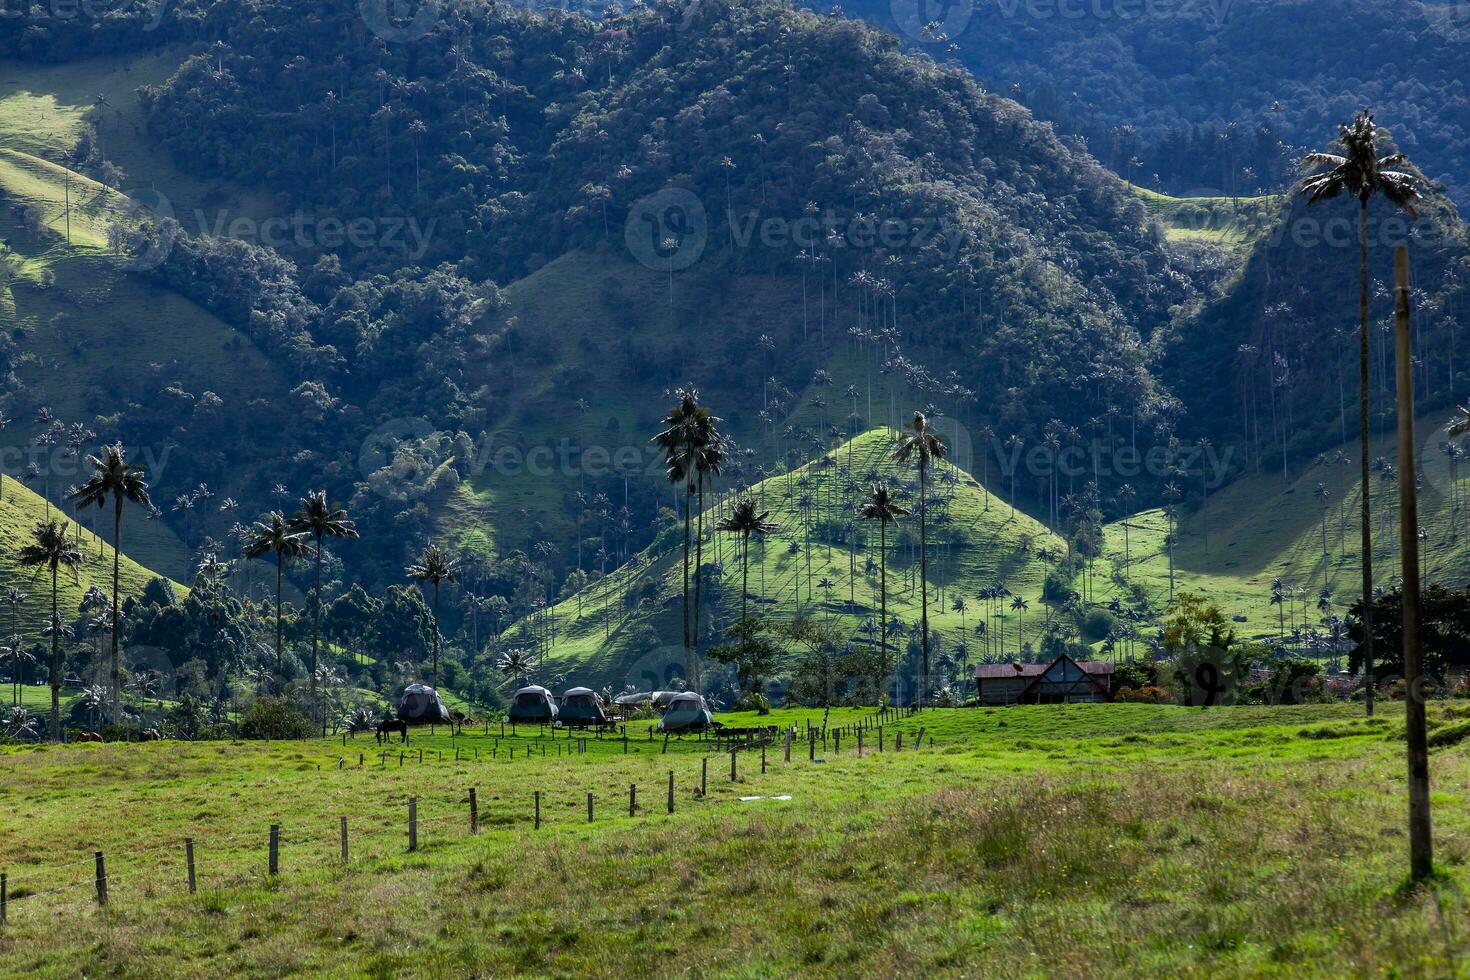 Camping tents, wax palms and  the beautiful mountains at Cocora Valley located on the Quindio region in Colombia photo